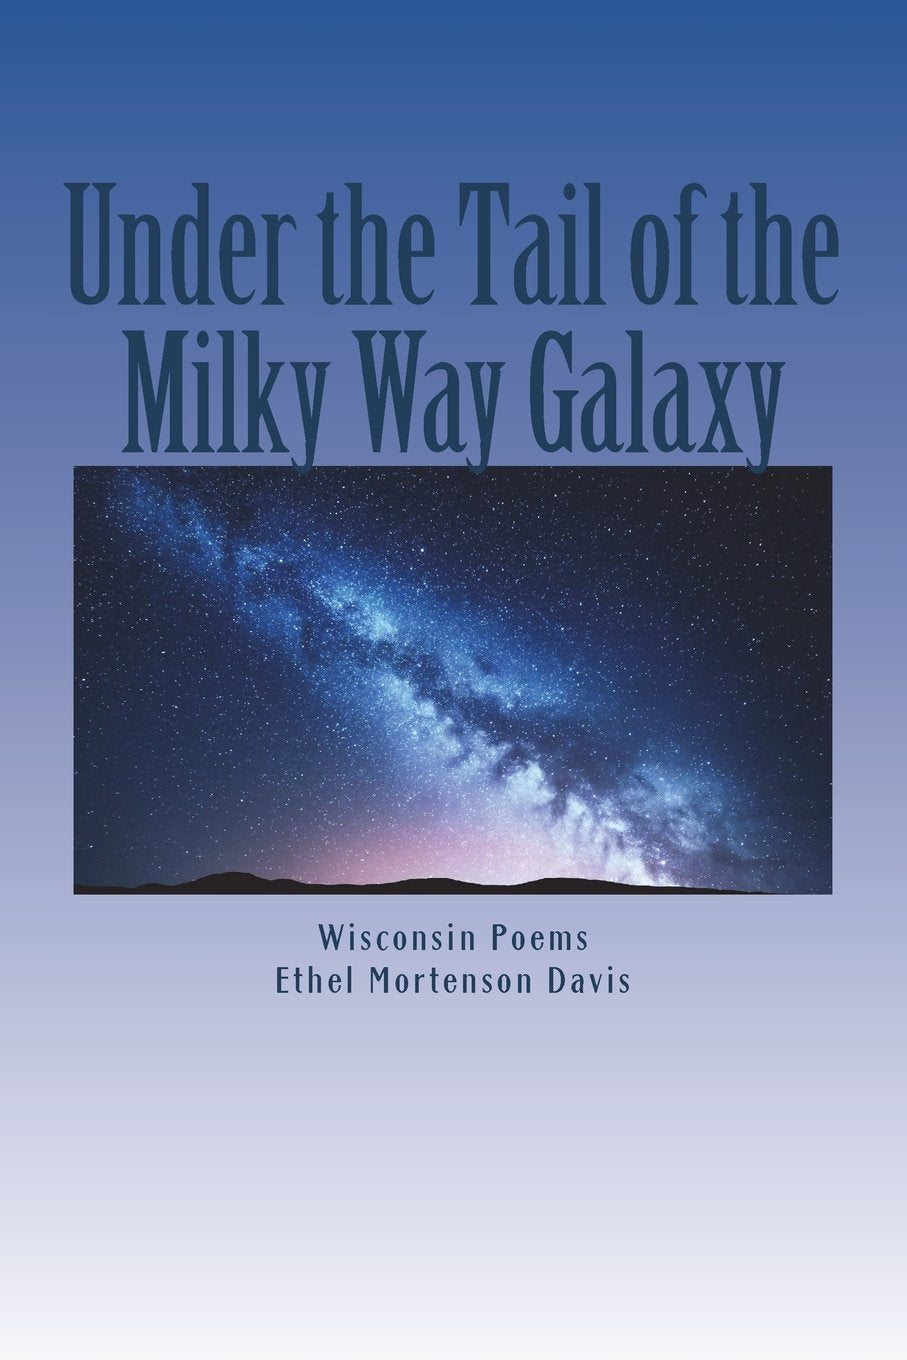 Under the Tail of the Milky Way Galaxy: Wisconsin Poems